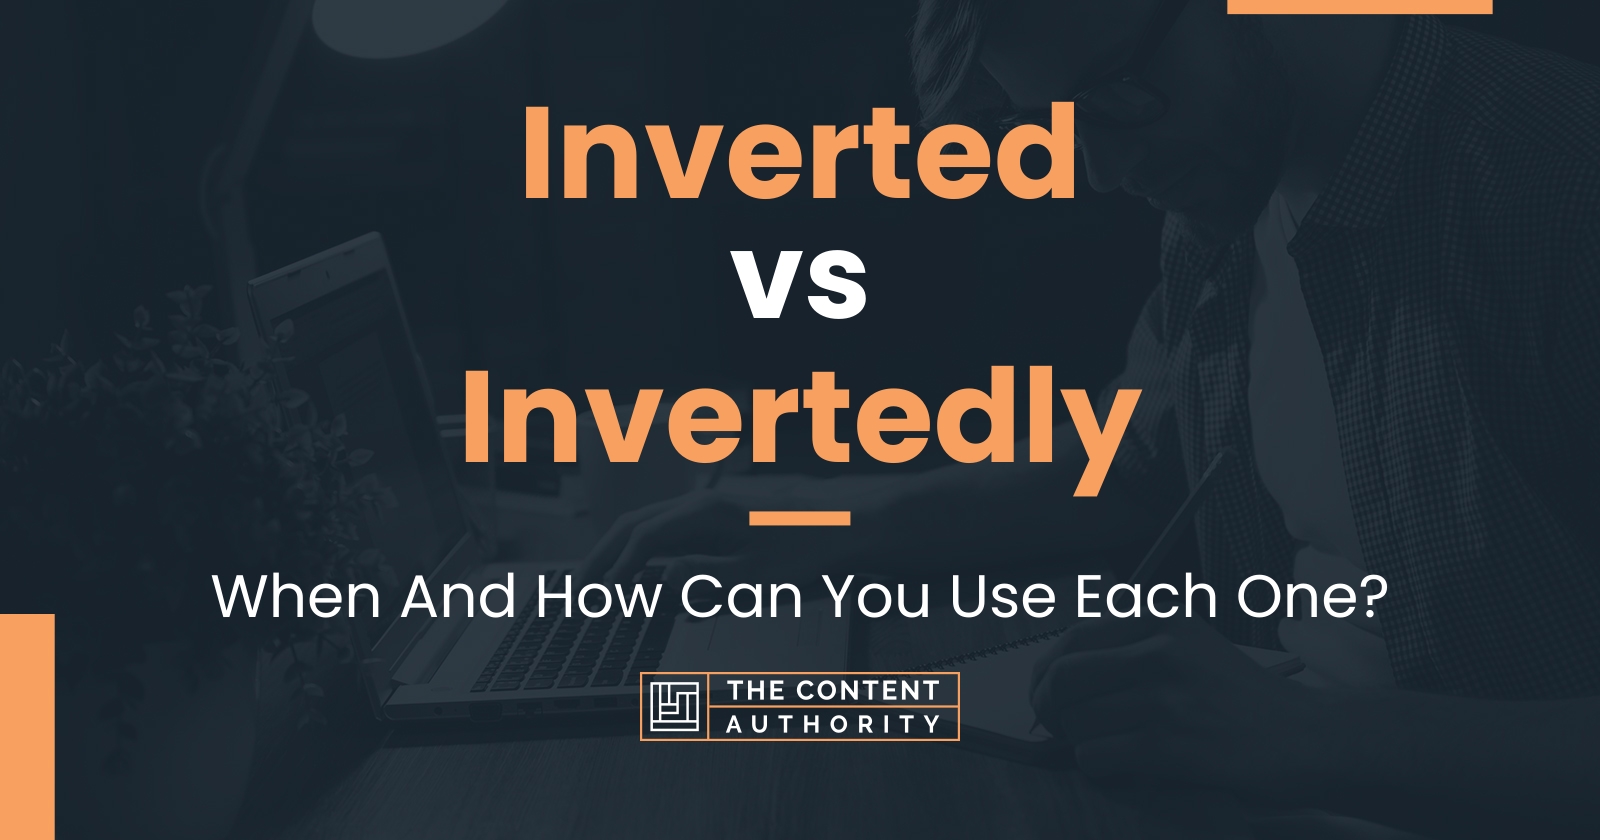 Inverted vs Invertedly: When And How Can You Use Each One?